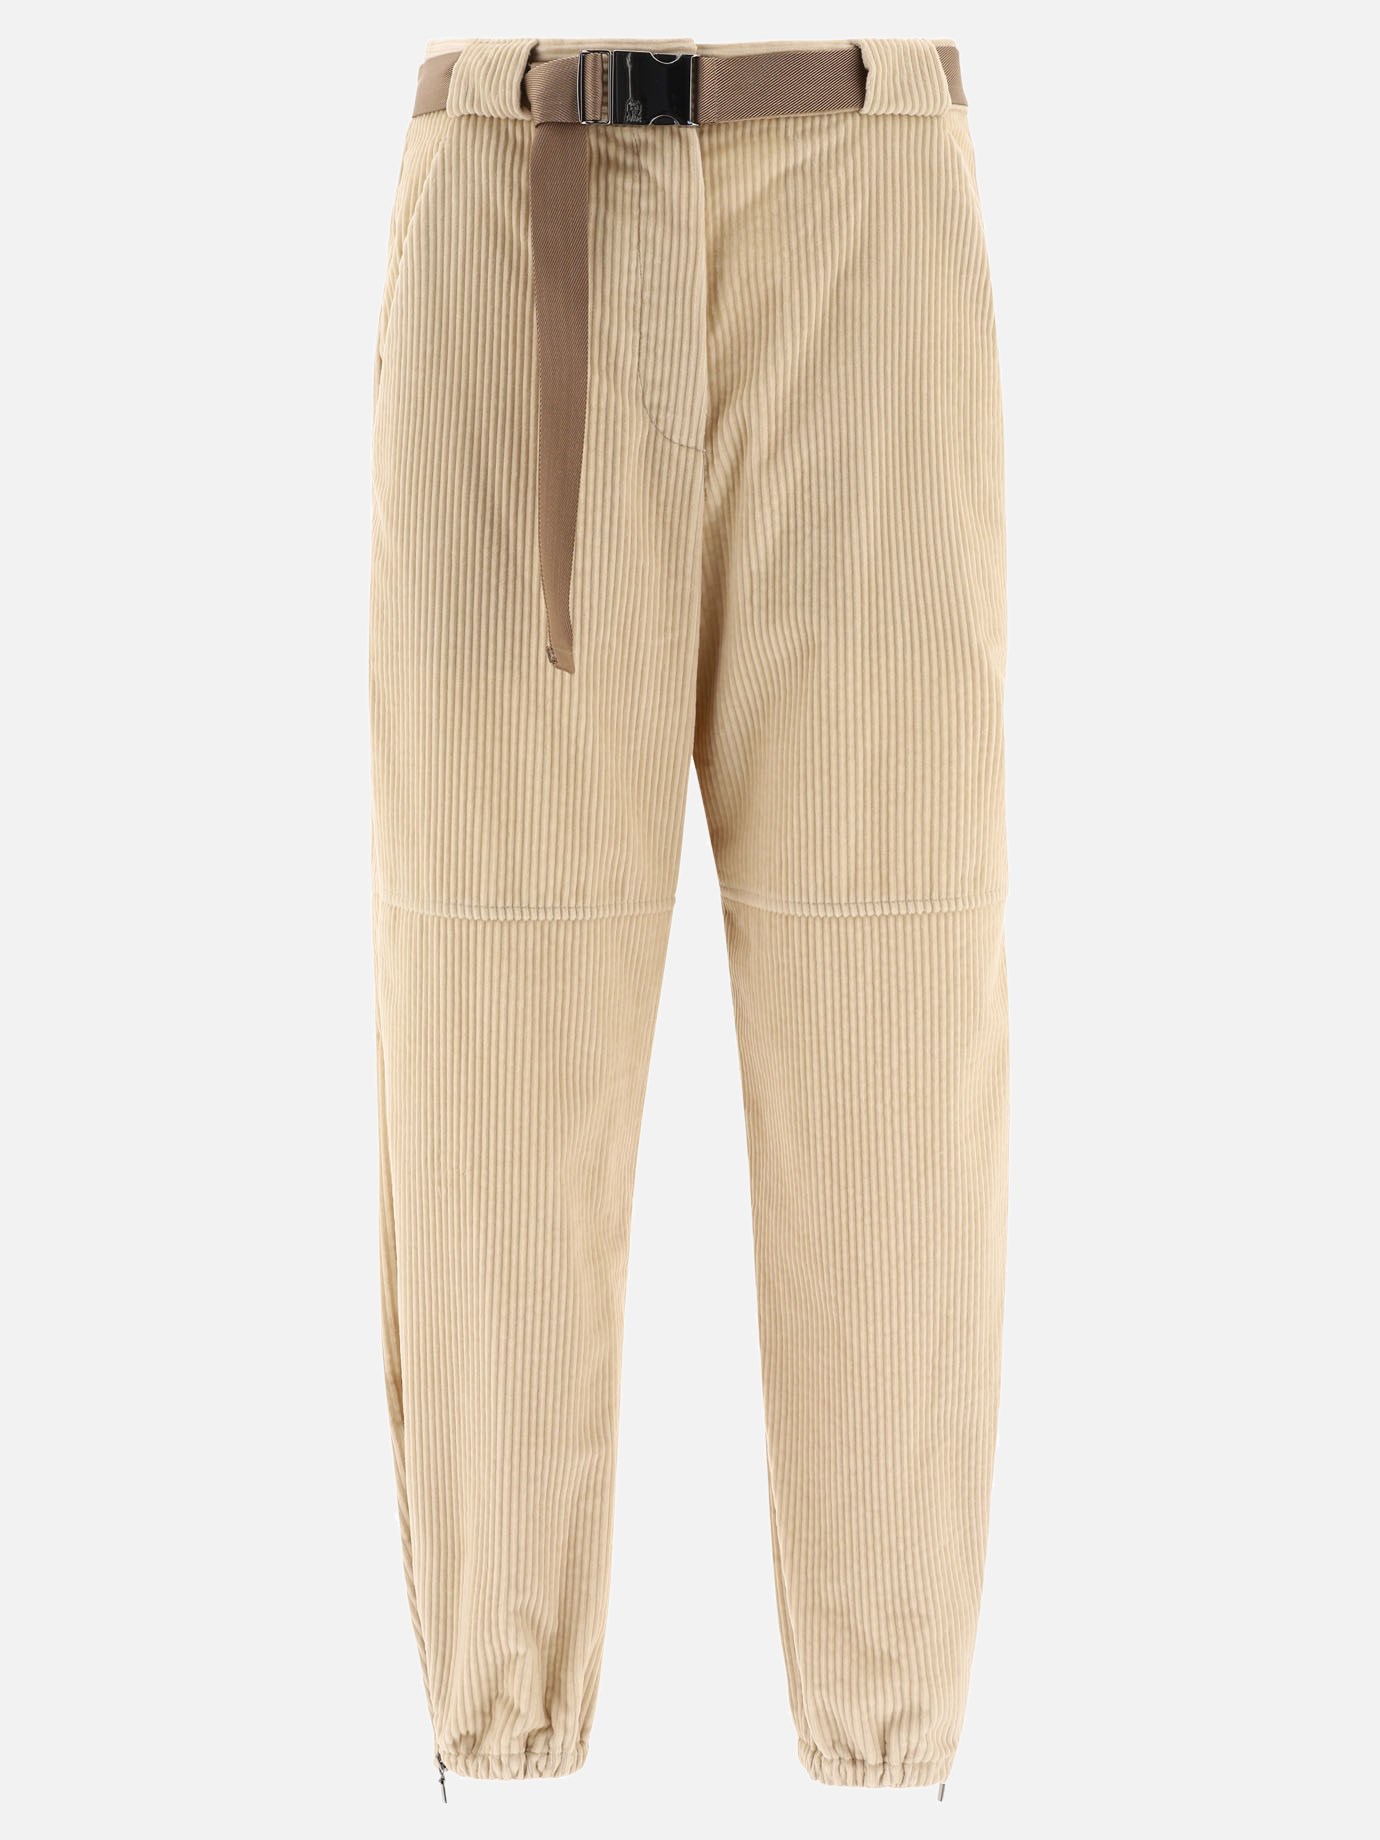 Ribbed trousers with beltby Brunello Cucinelli - 0